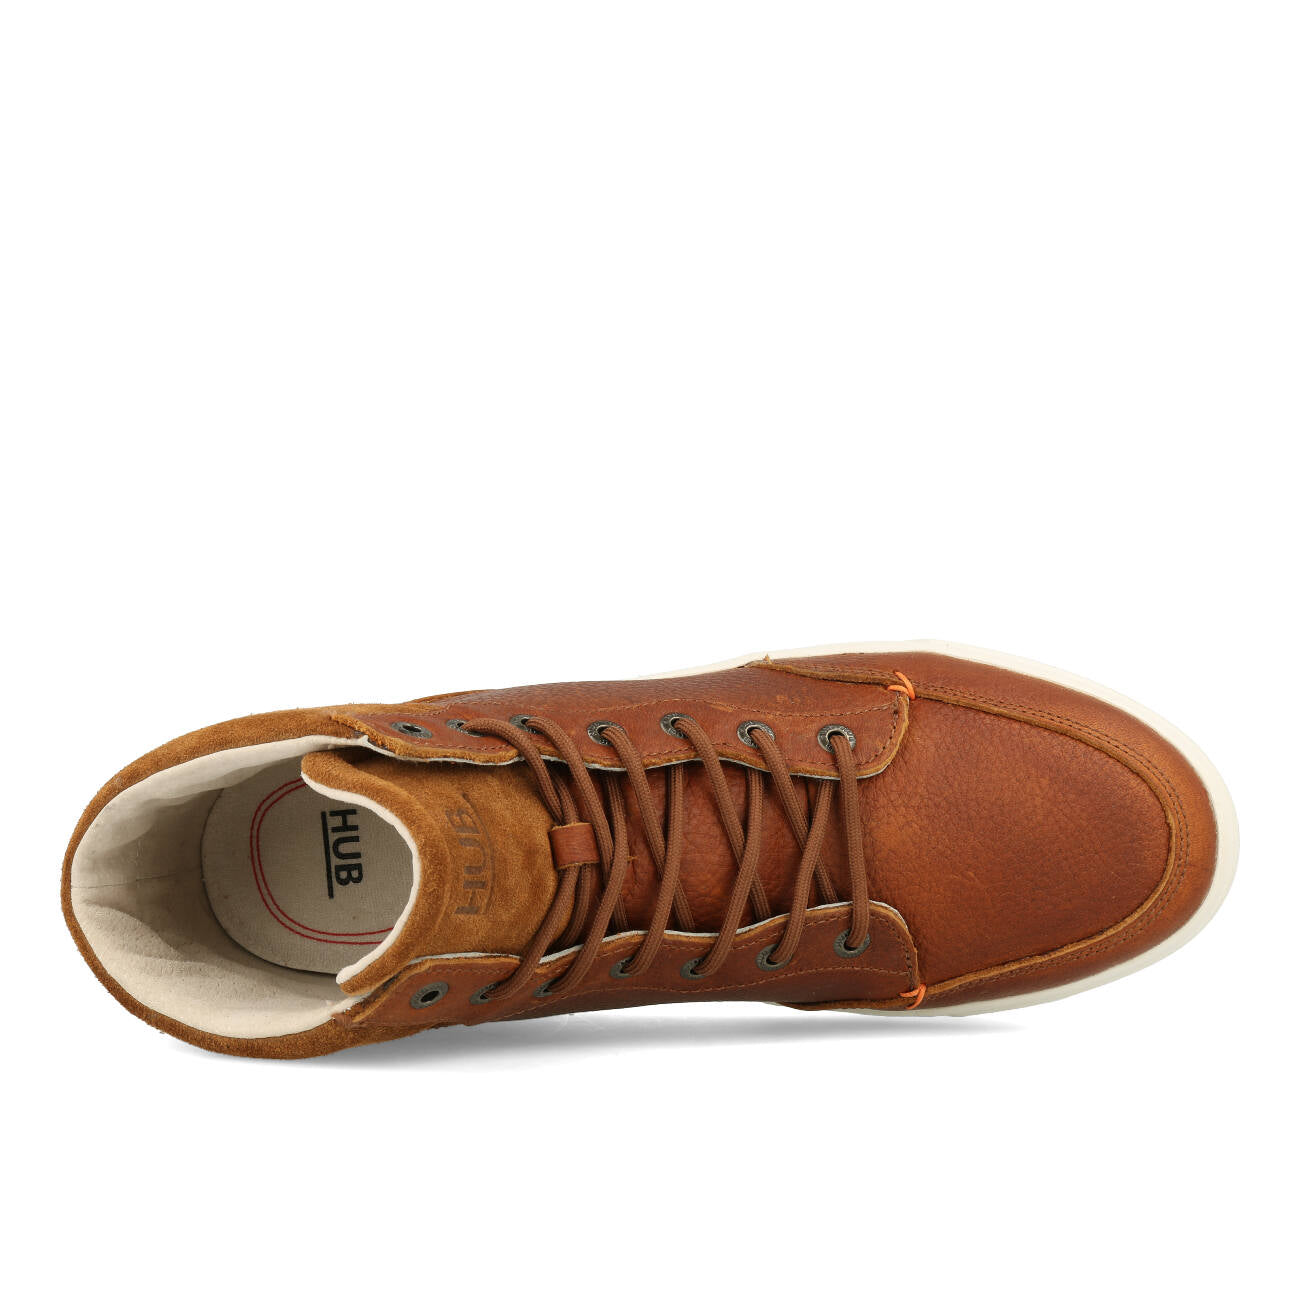 HUB Dundee L52 Leather Suede Herren Cognac Off White